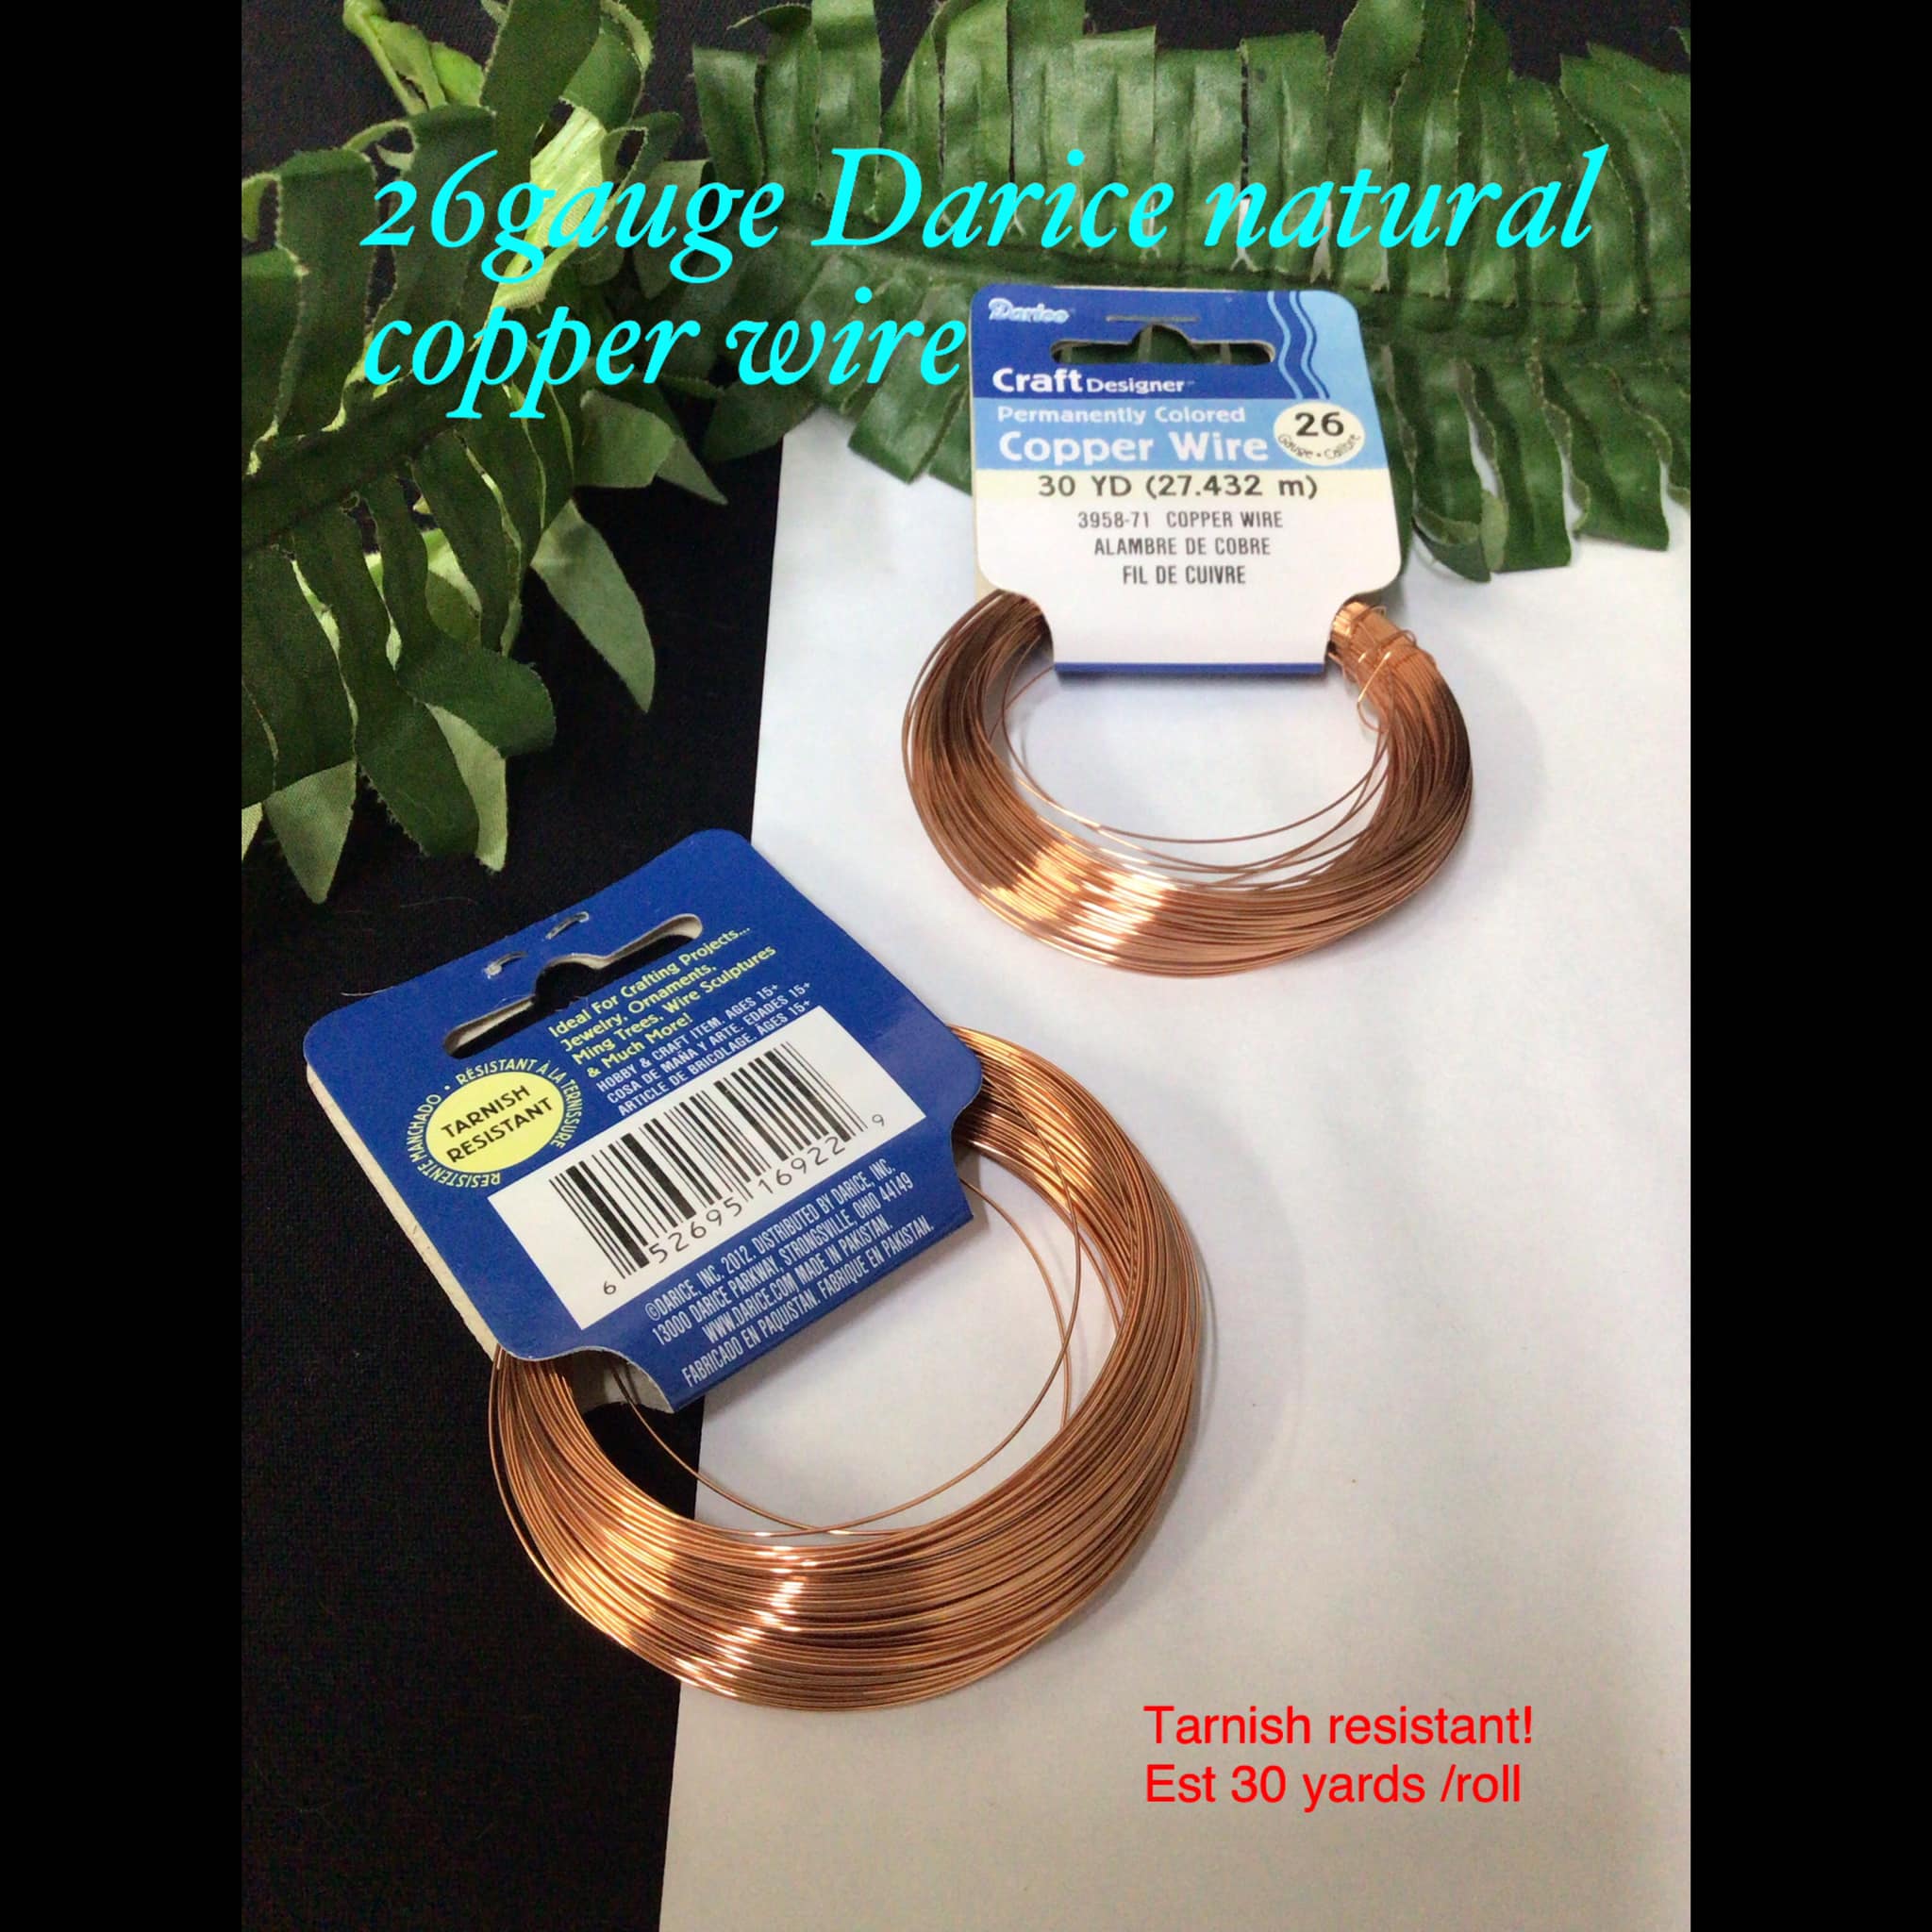 Darice 22 Gauge Copper Wire 10 YD Permanently Colored Tarnish Resistant NEW